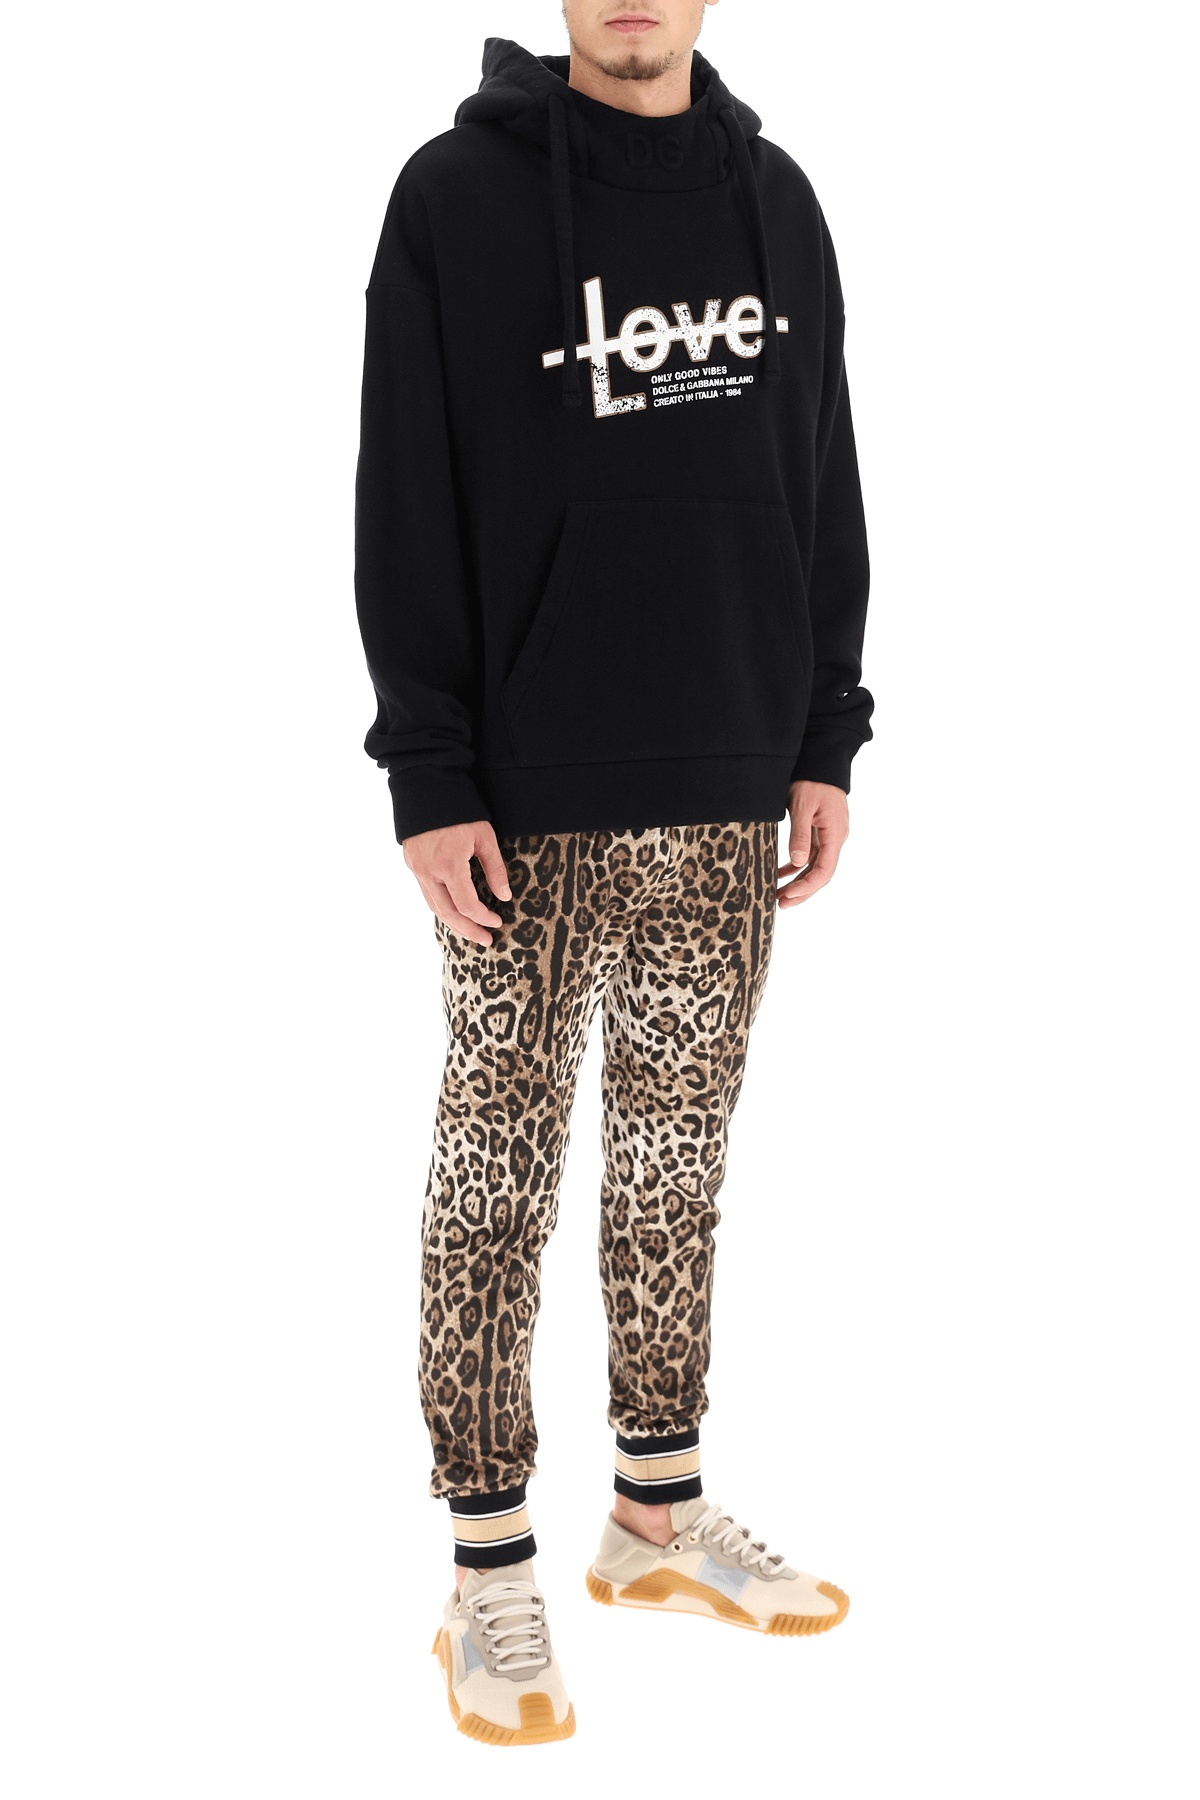 Dolce & Gabbana 'Only Good Vibes' Print Hoodie - 2